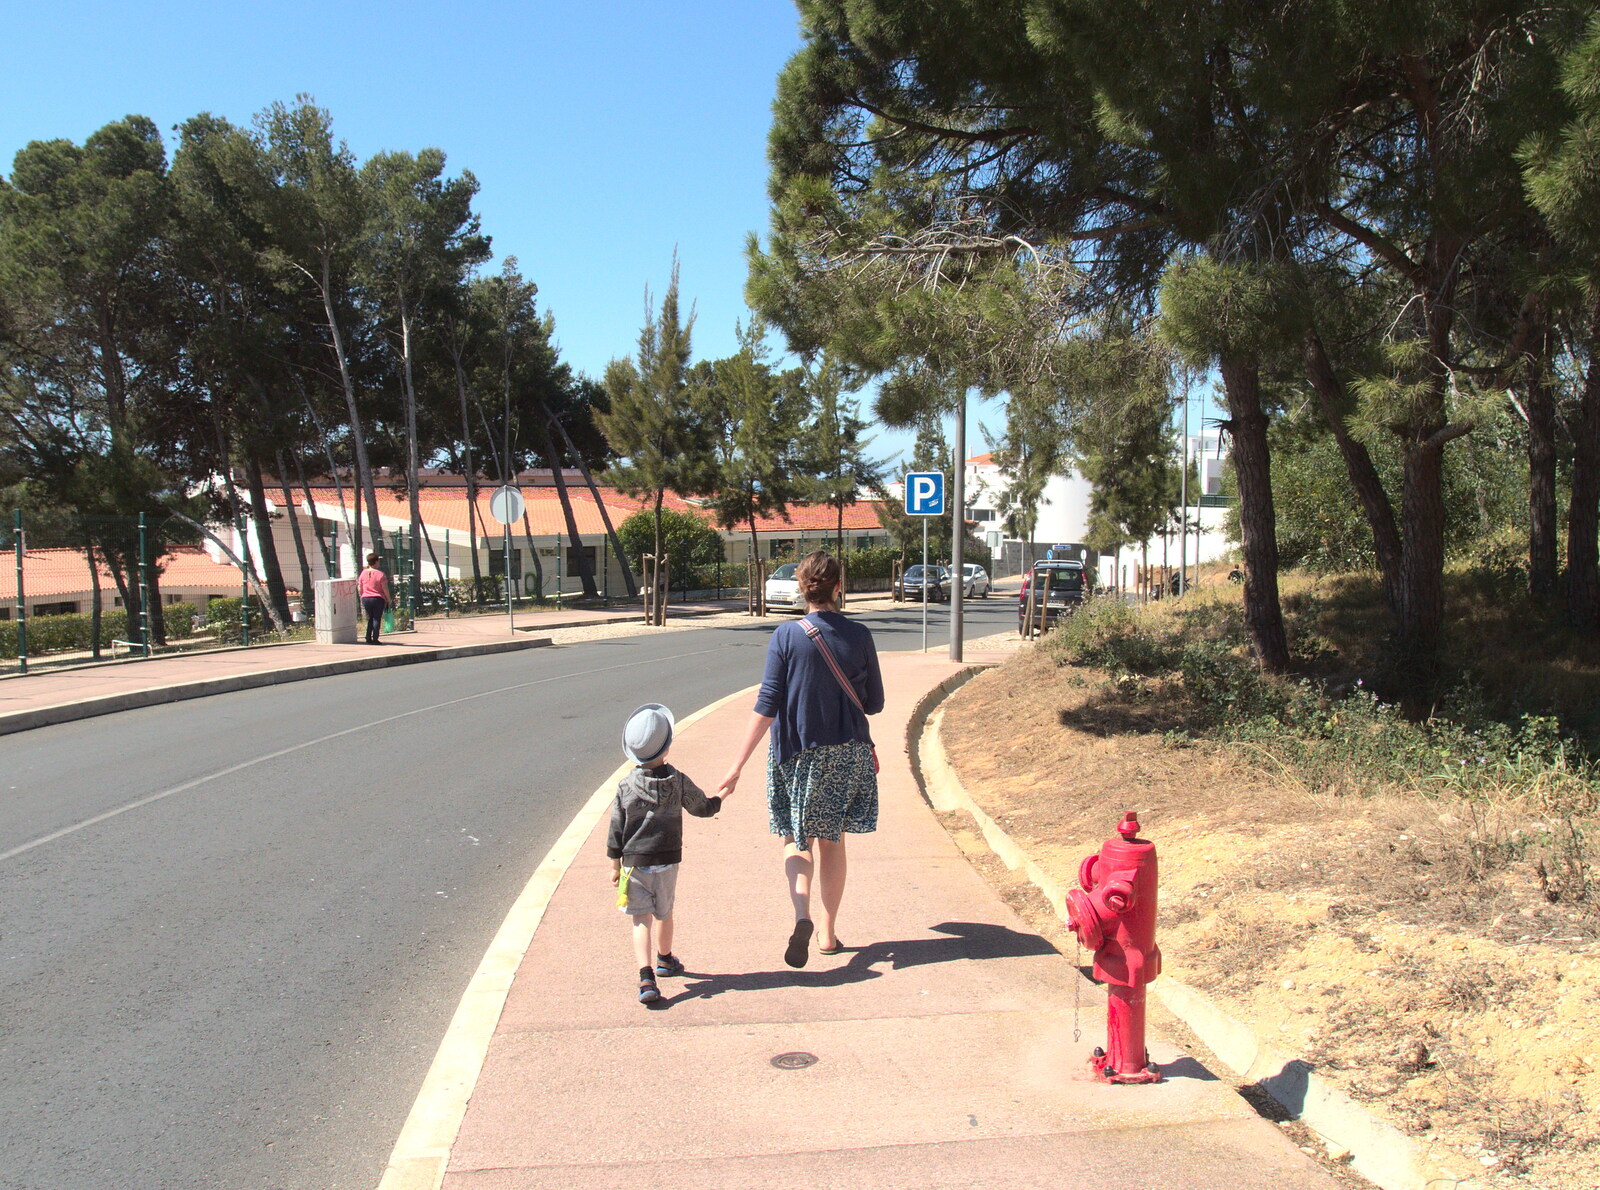 Harry and Isobel on the way down to Inatel beach from Last Days and the Journey Home, Albufeira, Portugal - 9th April 2016